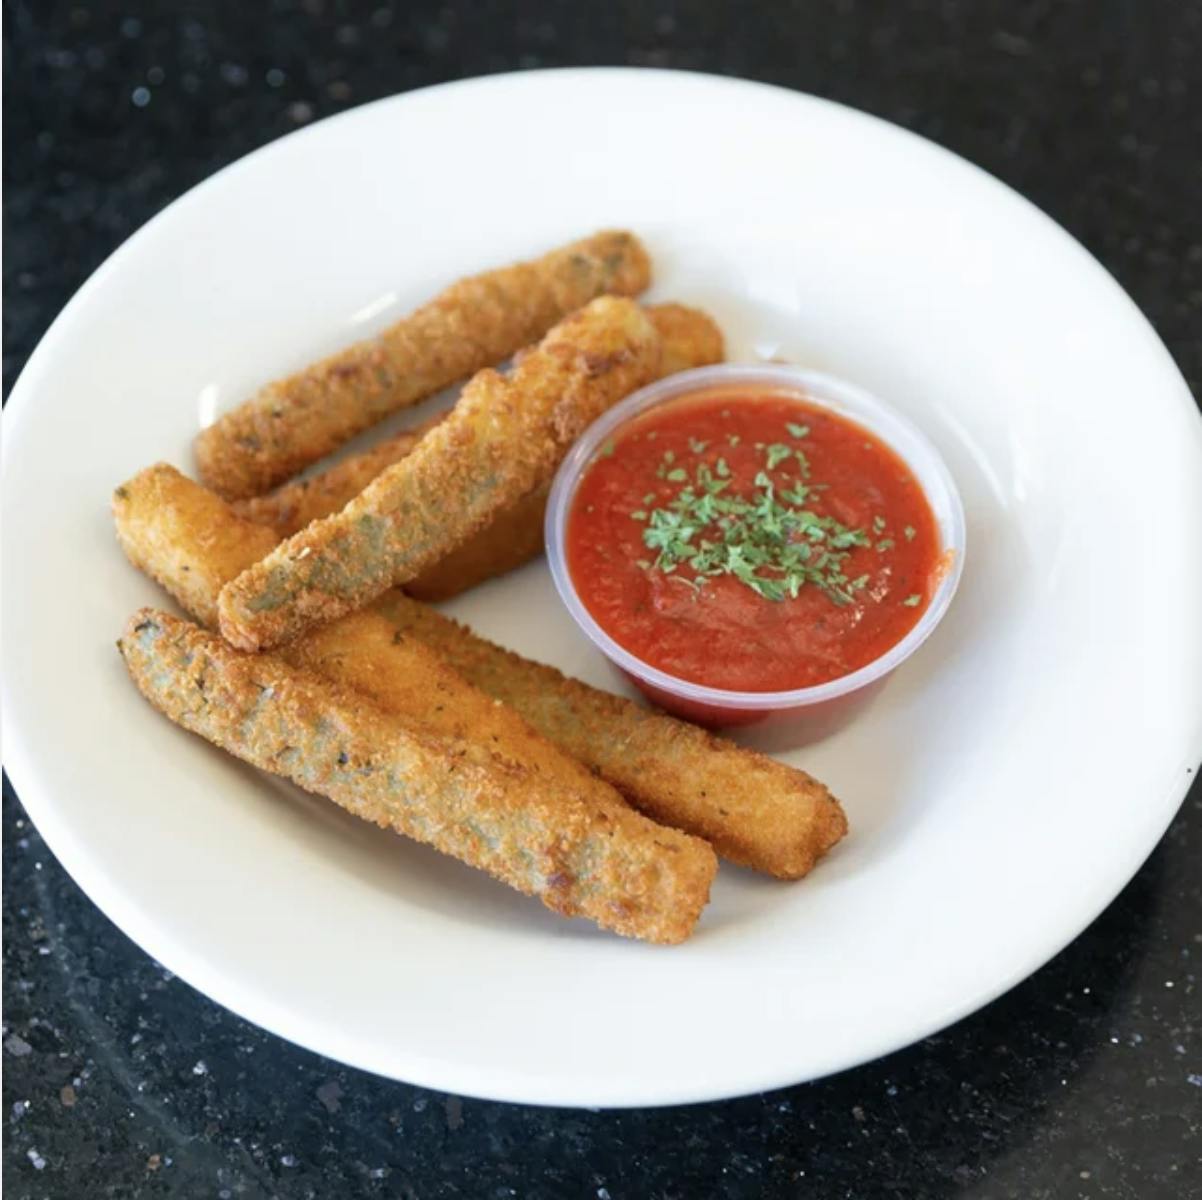 Zucchini Sticks from Ameci Pizza & Pasta - Lake Forest in Lake Forest, CA